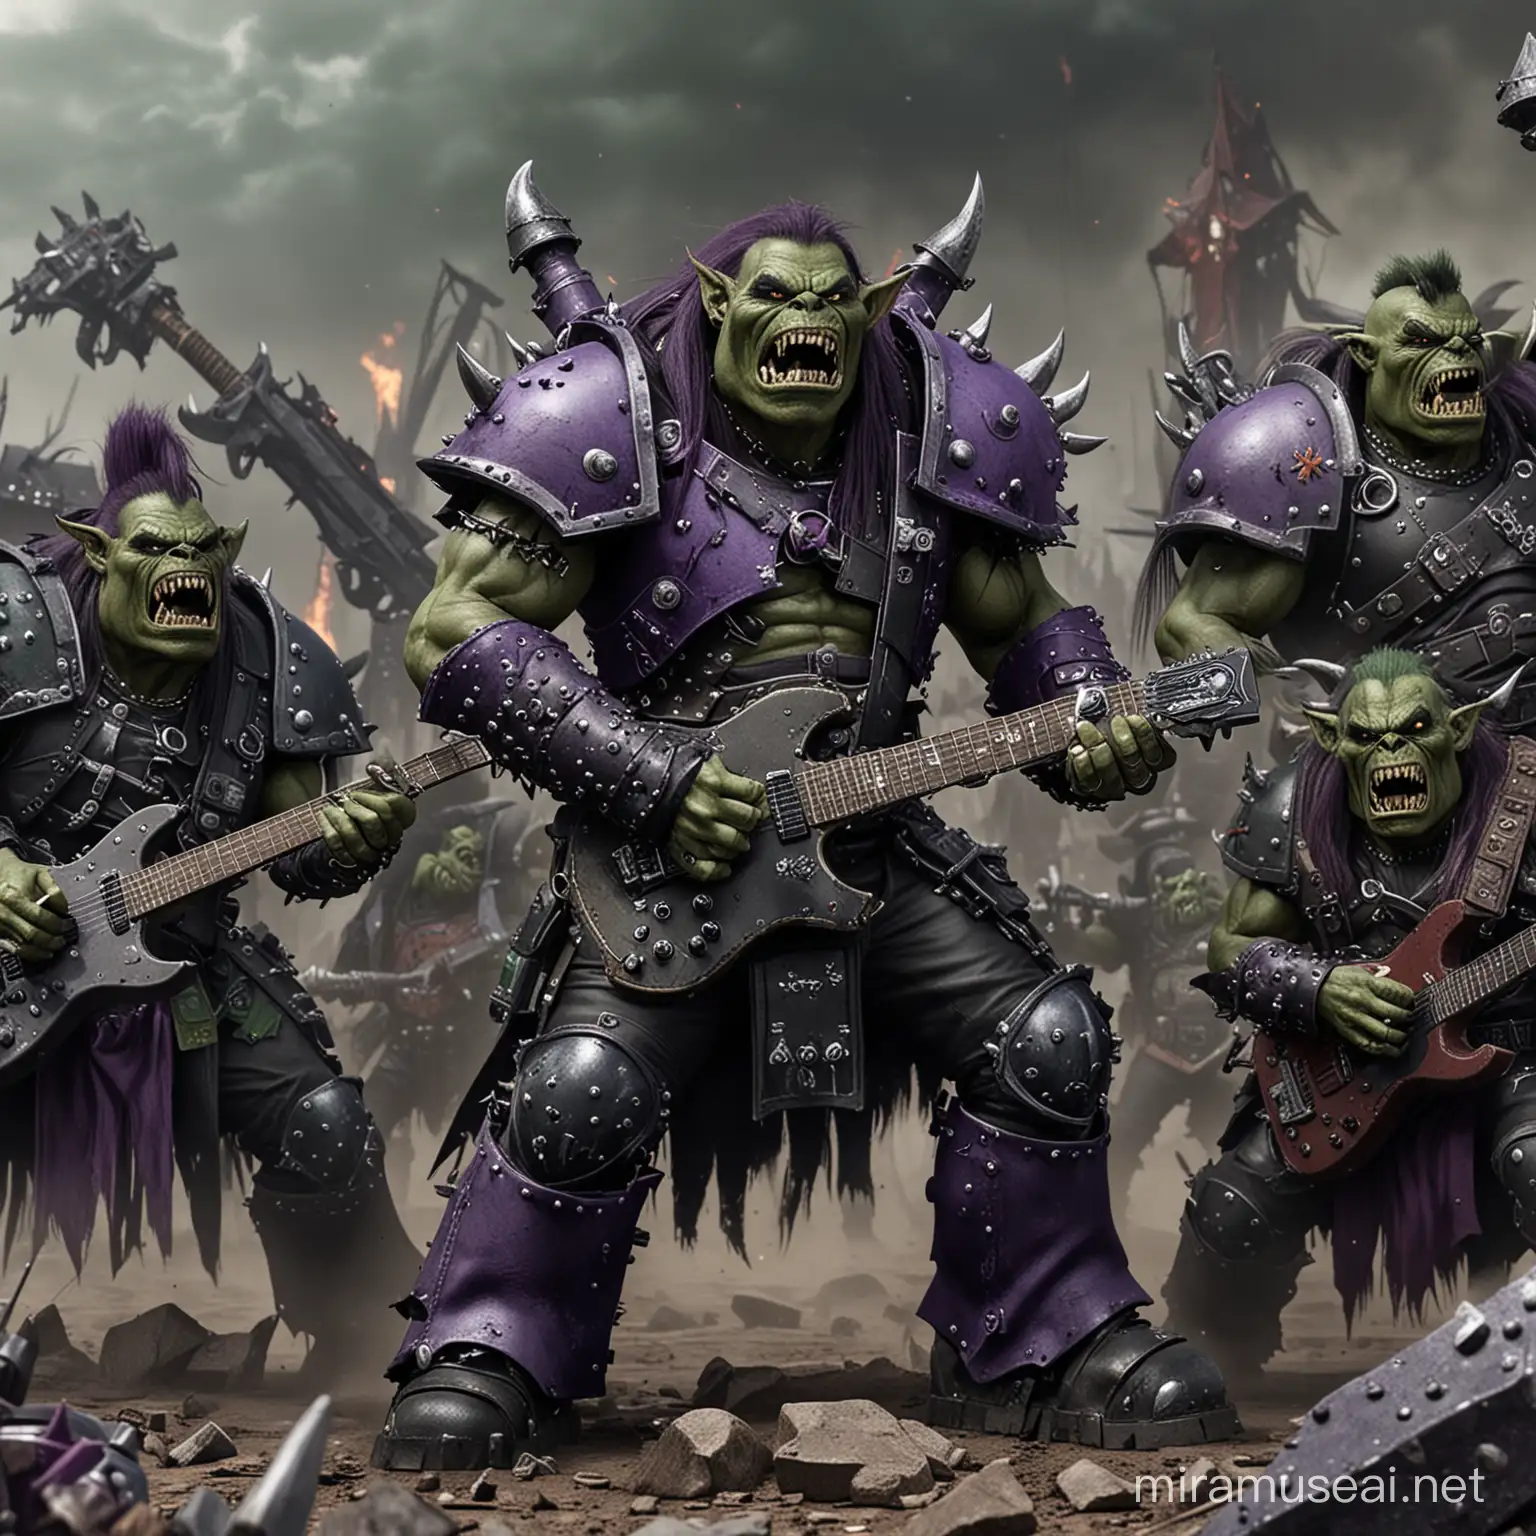 Ork Heavy Metal Band Rocking Out in Warhammer 40K Battle